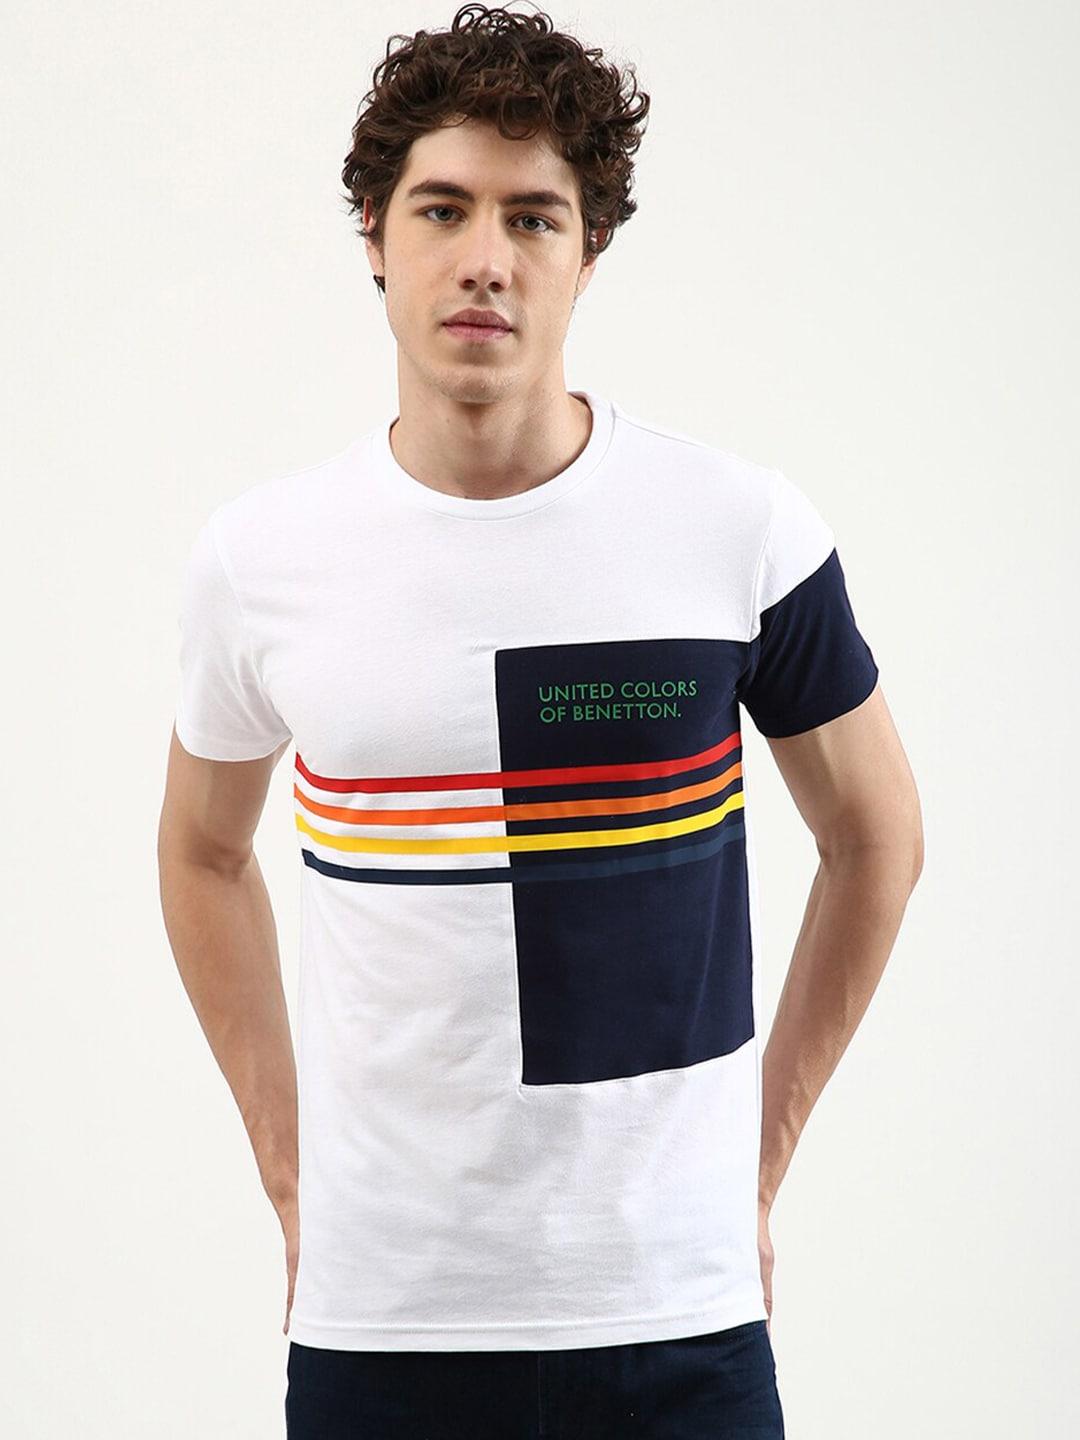 united-colors-of-benetton-men-white-typography-printed-t-shirt